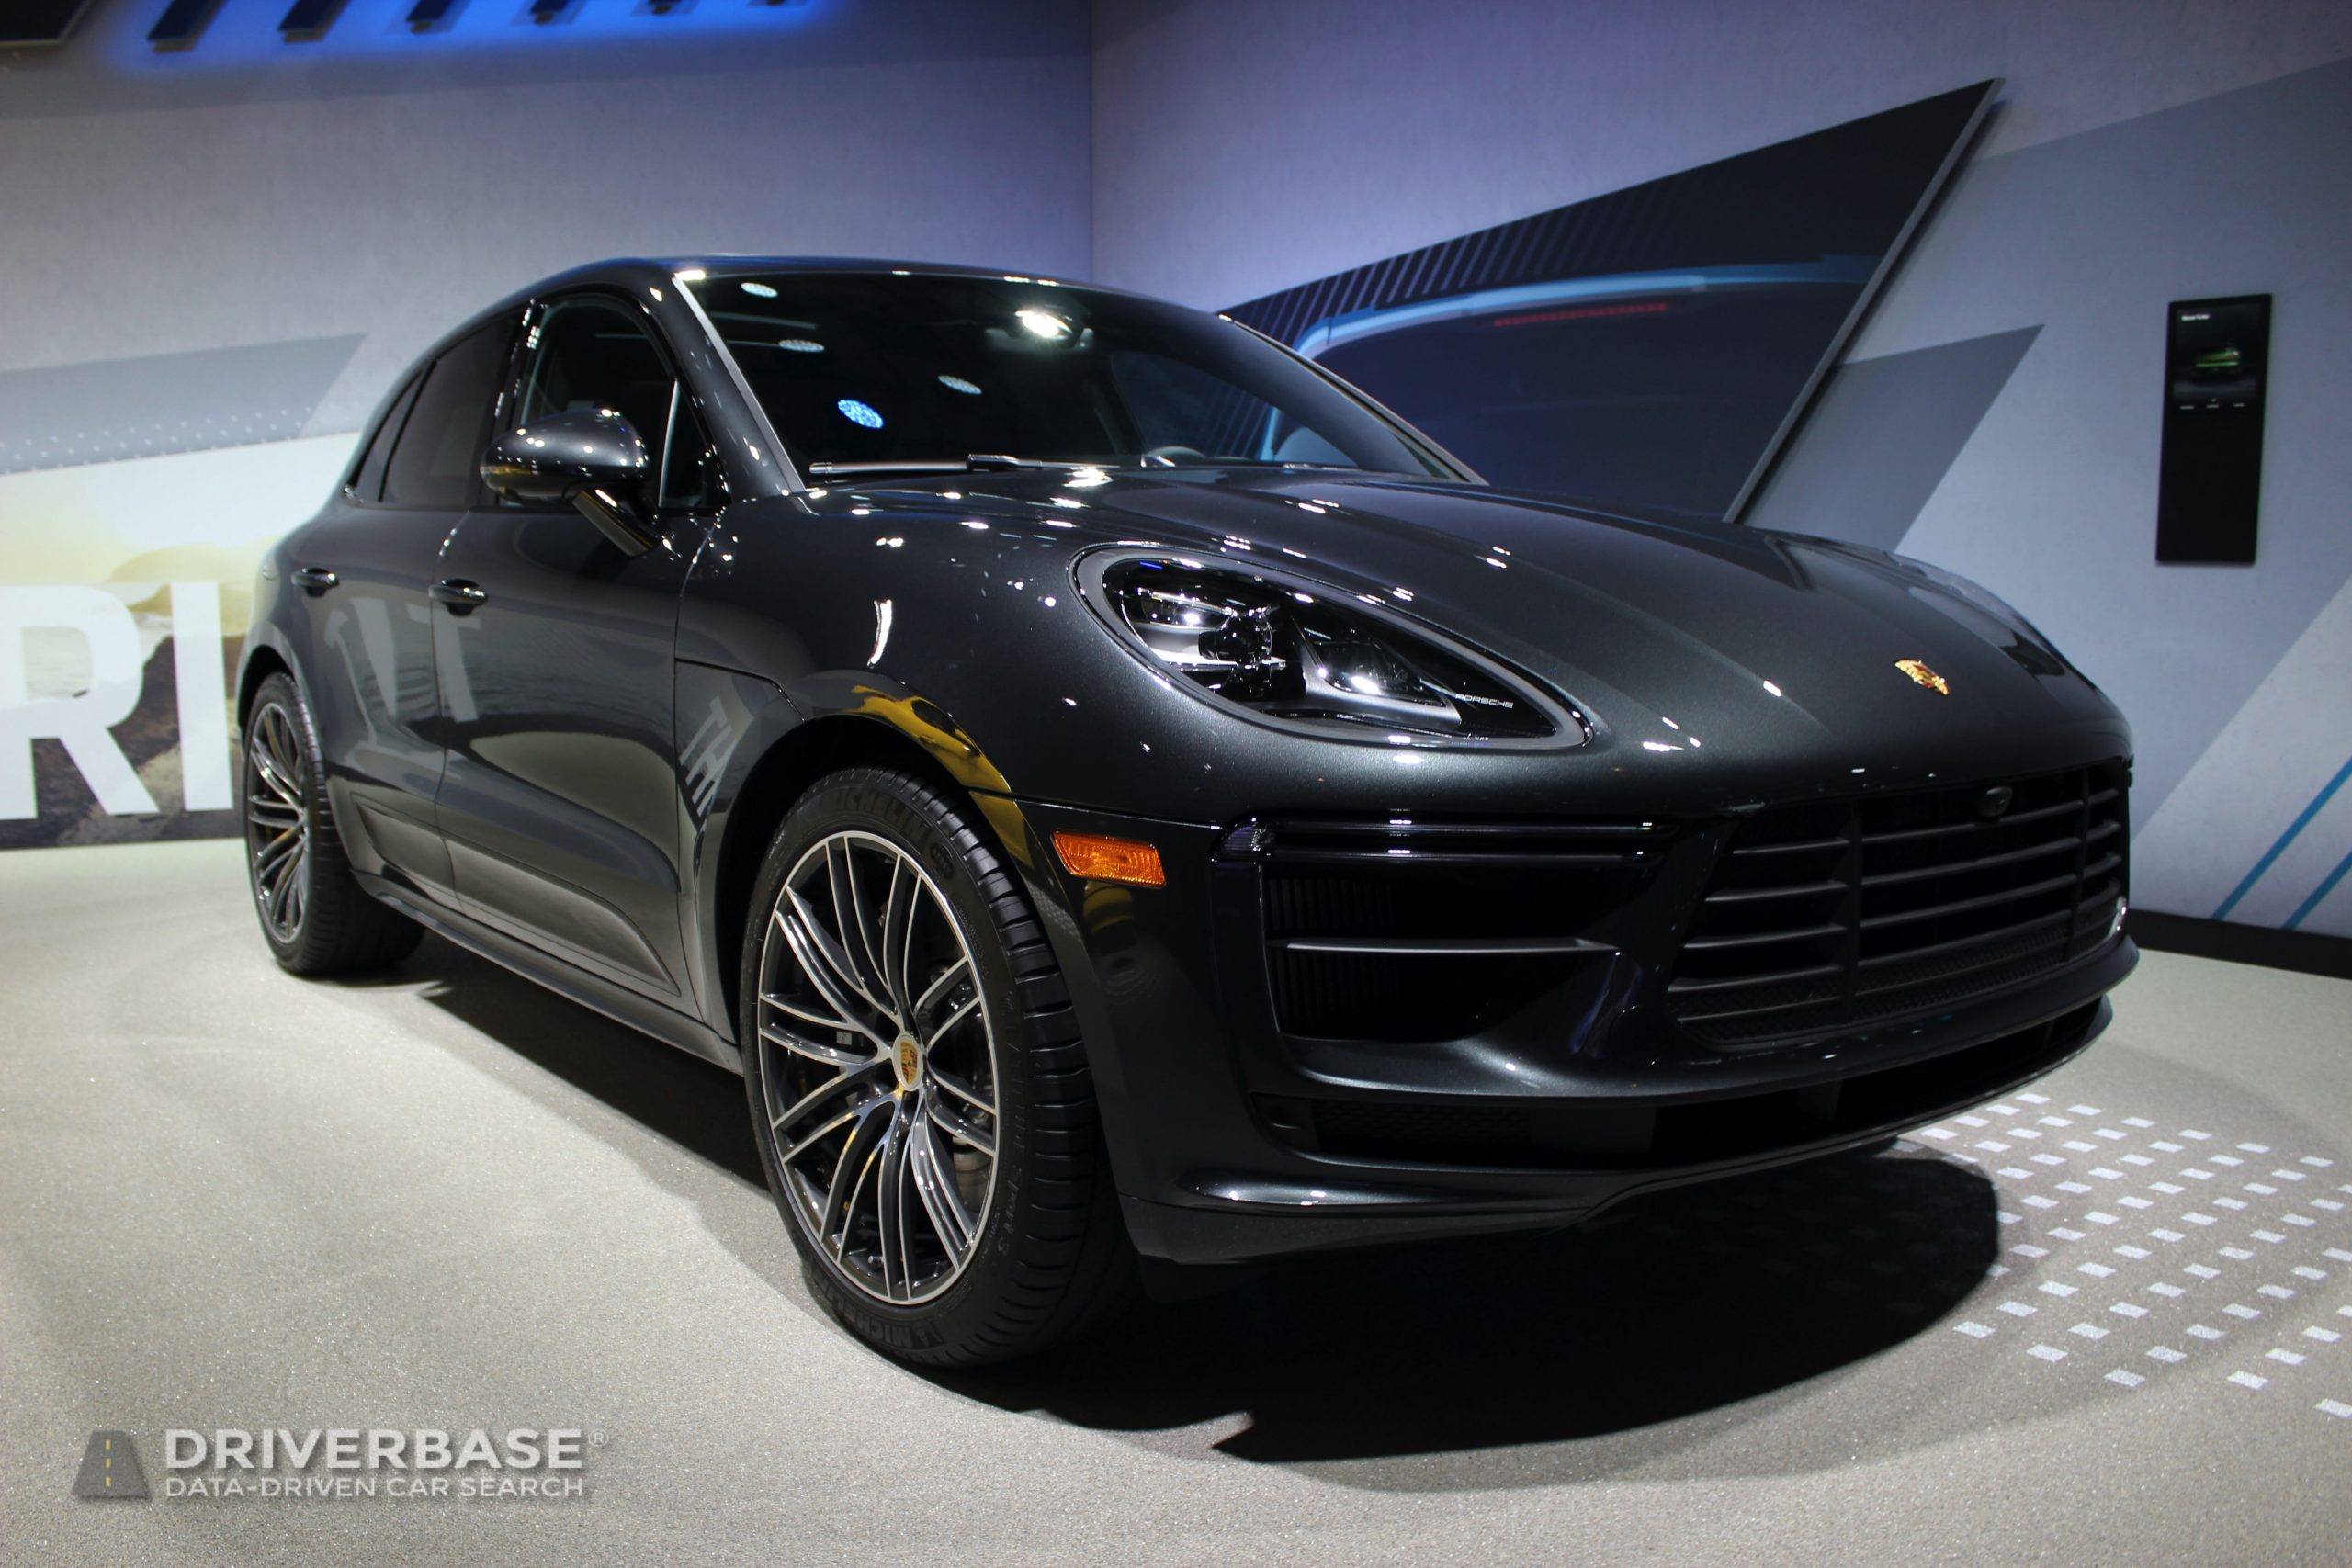 2020 Porsche Macan Turbo at the 2019 Los Angeles Auto Show